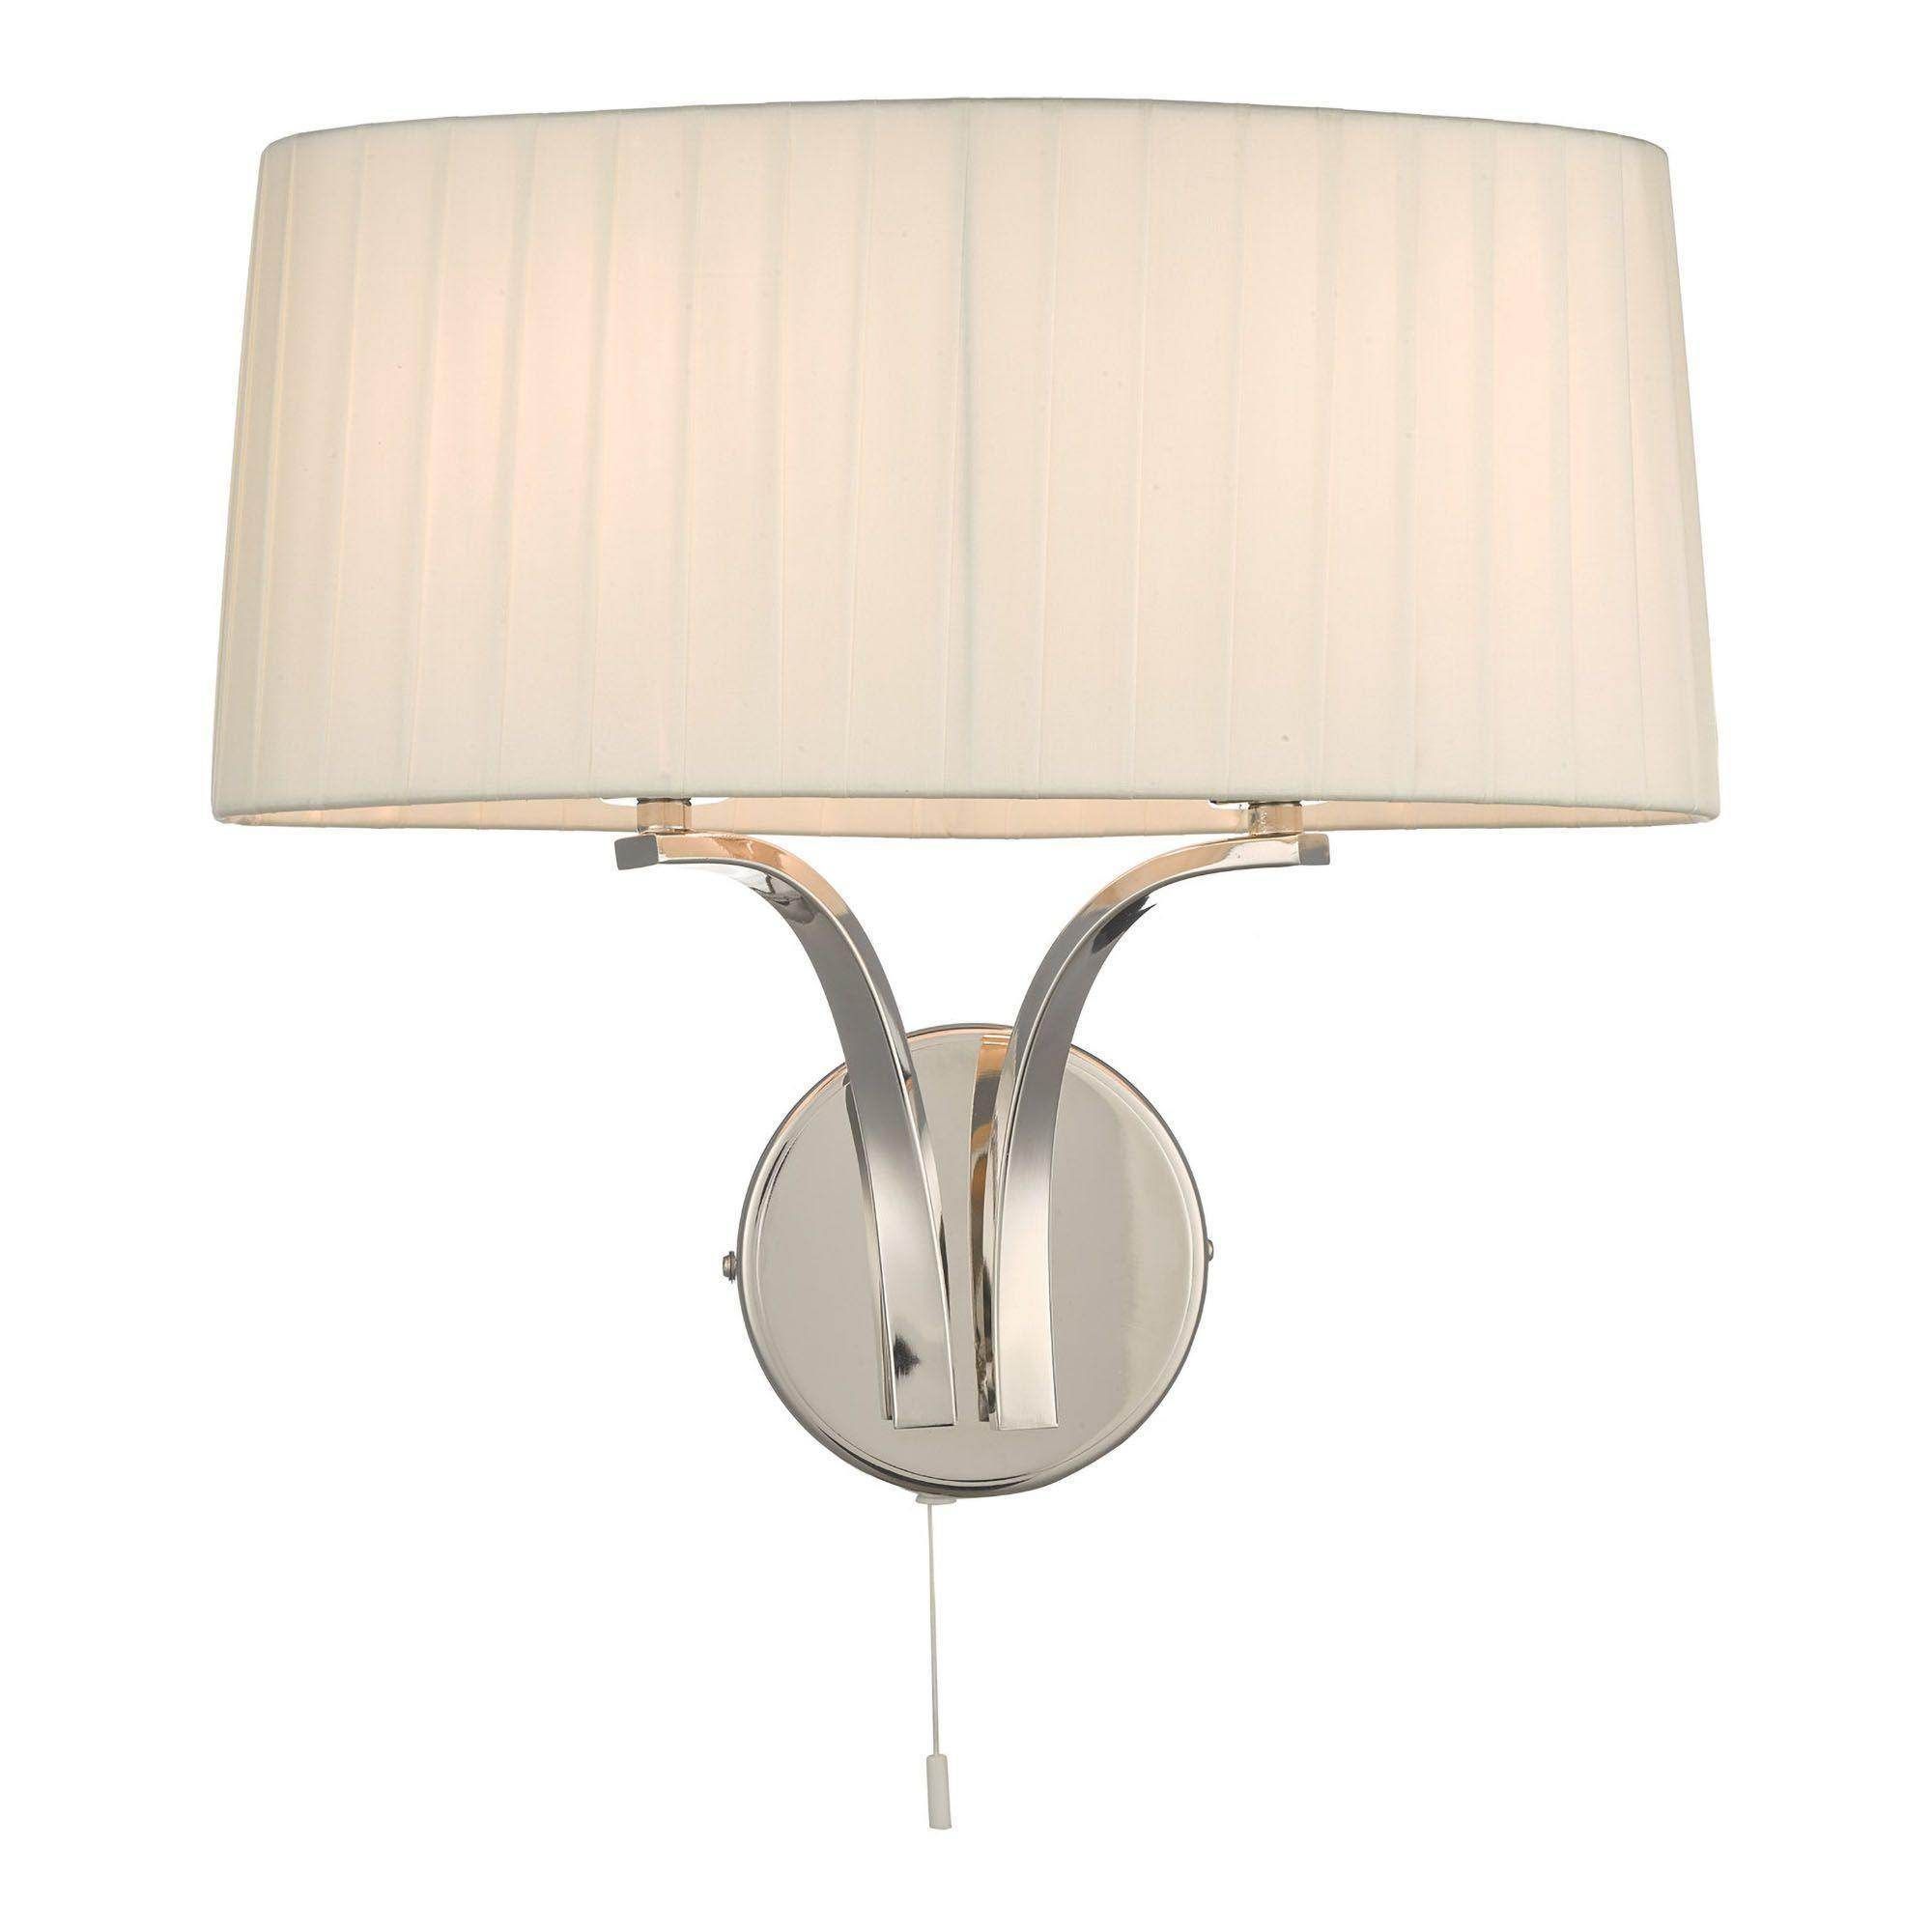 Dar Cristin 2 Light Wall Light Antique Brass With Taupe Shade Polished Nickel with Ivory Shade